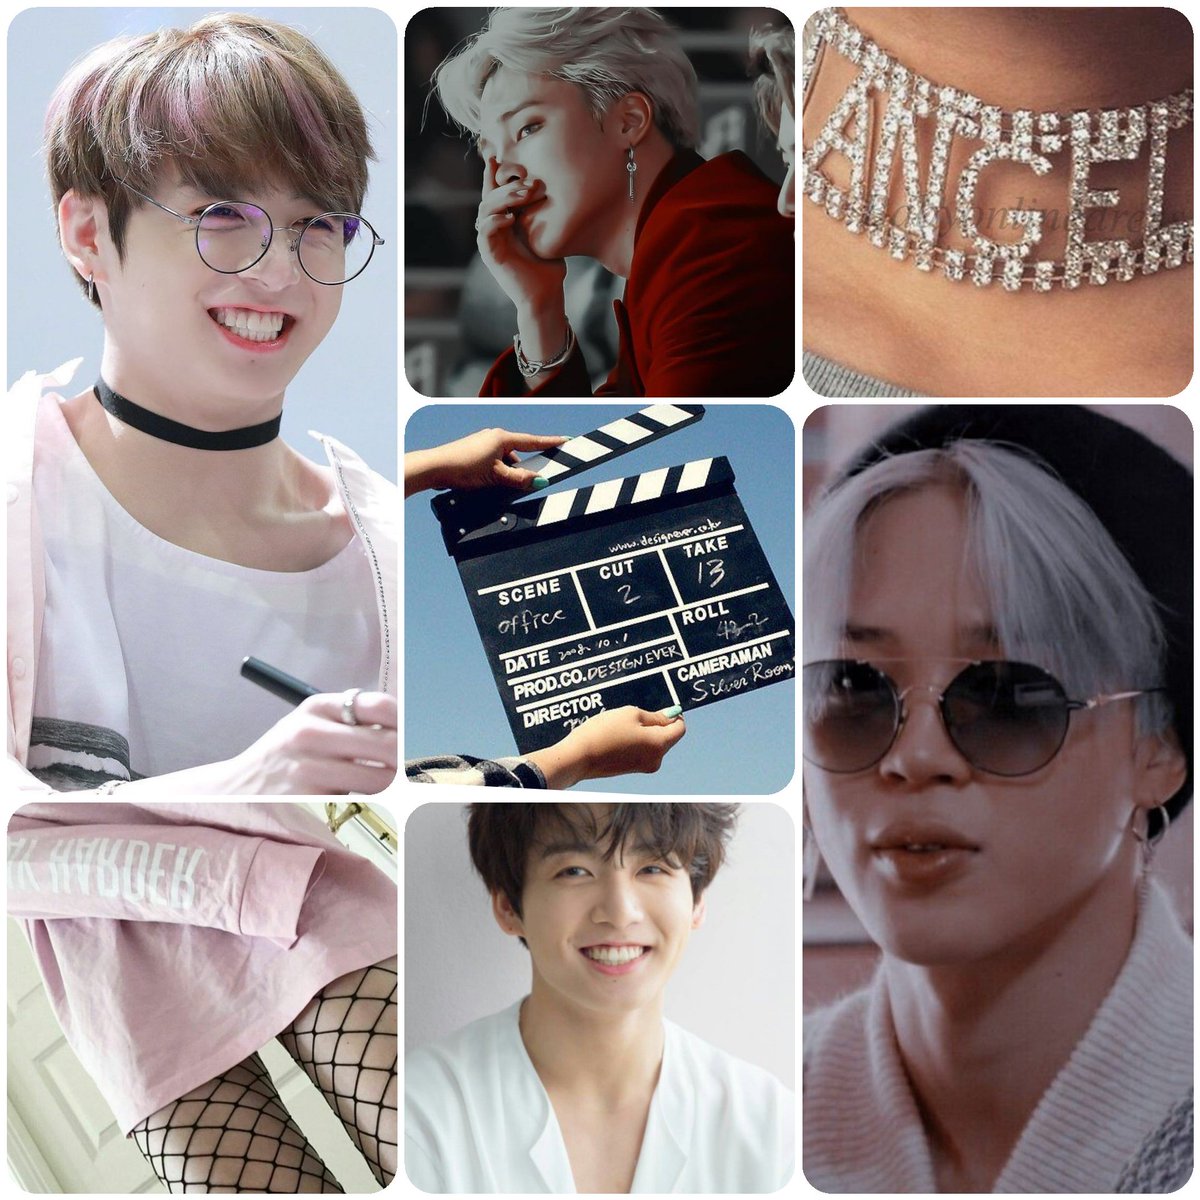  #jikookau where bunny kook gets picked up from high profile actor jimin in a café he works at. everyone thinks he's just a trophy hybrid that tags along to jimins set but in private jimin calls him fiancé.